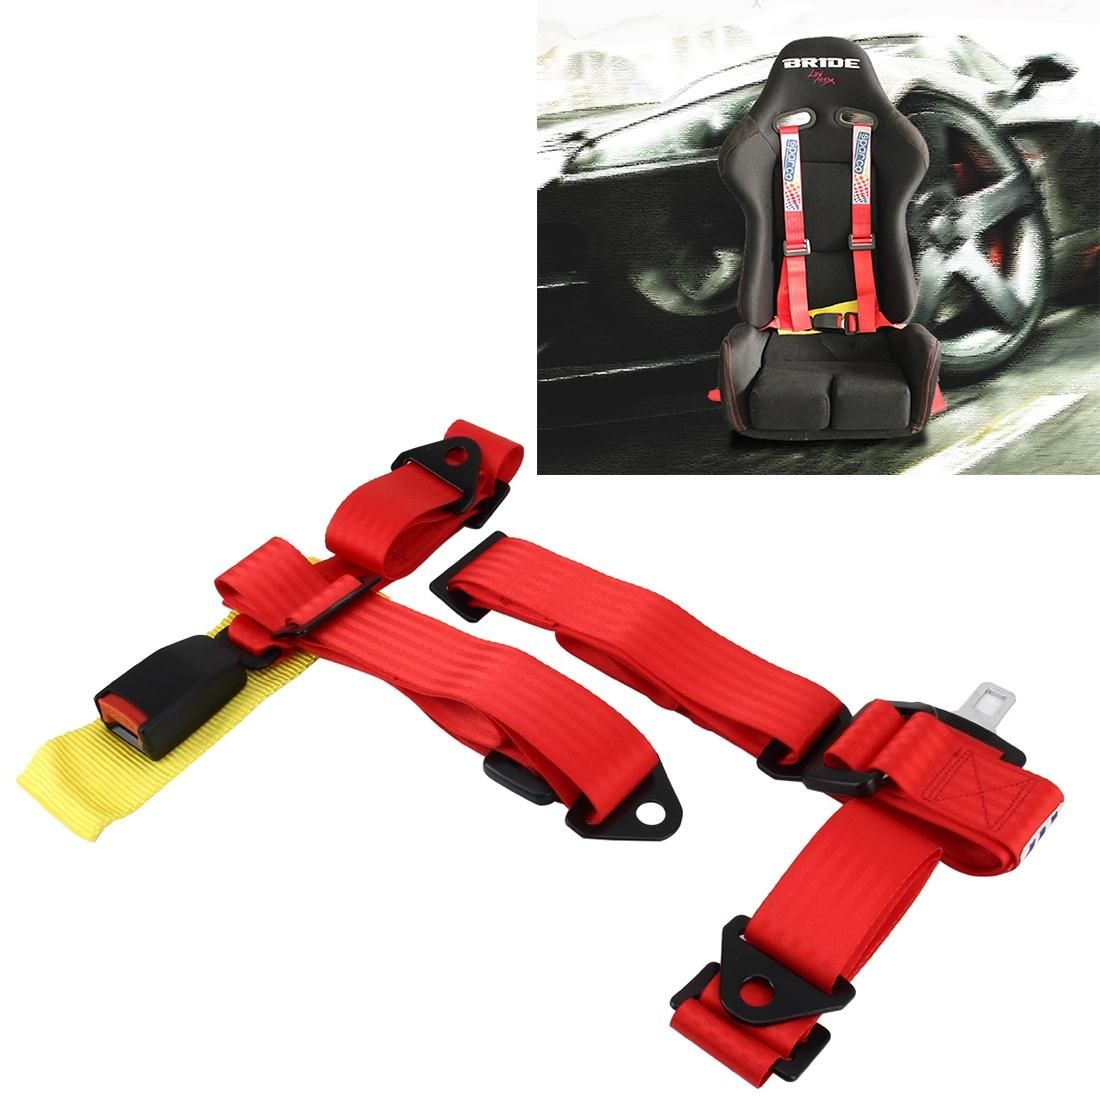 Universal Vehicle Racing  Auto Car Safety Seat Belt Buckle Harness Racing Harness Seat Belt  Car Racing Drift Essential Lightweight Belts (Red)